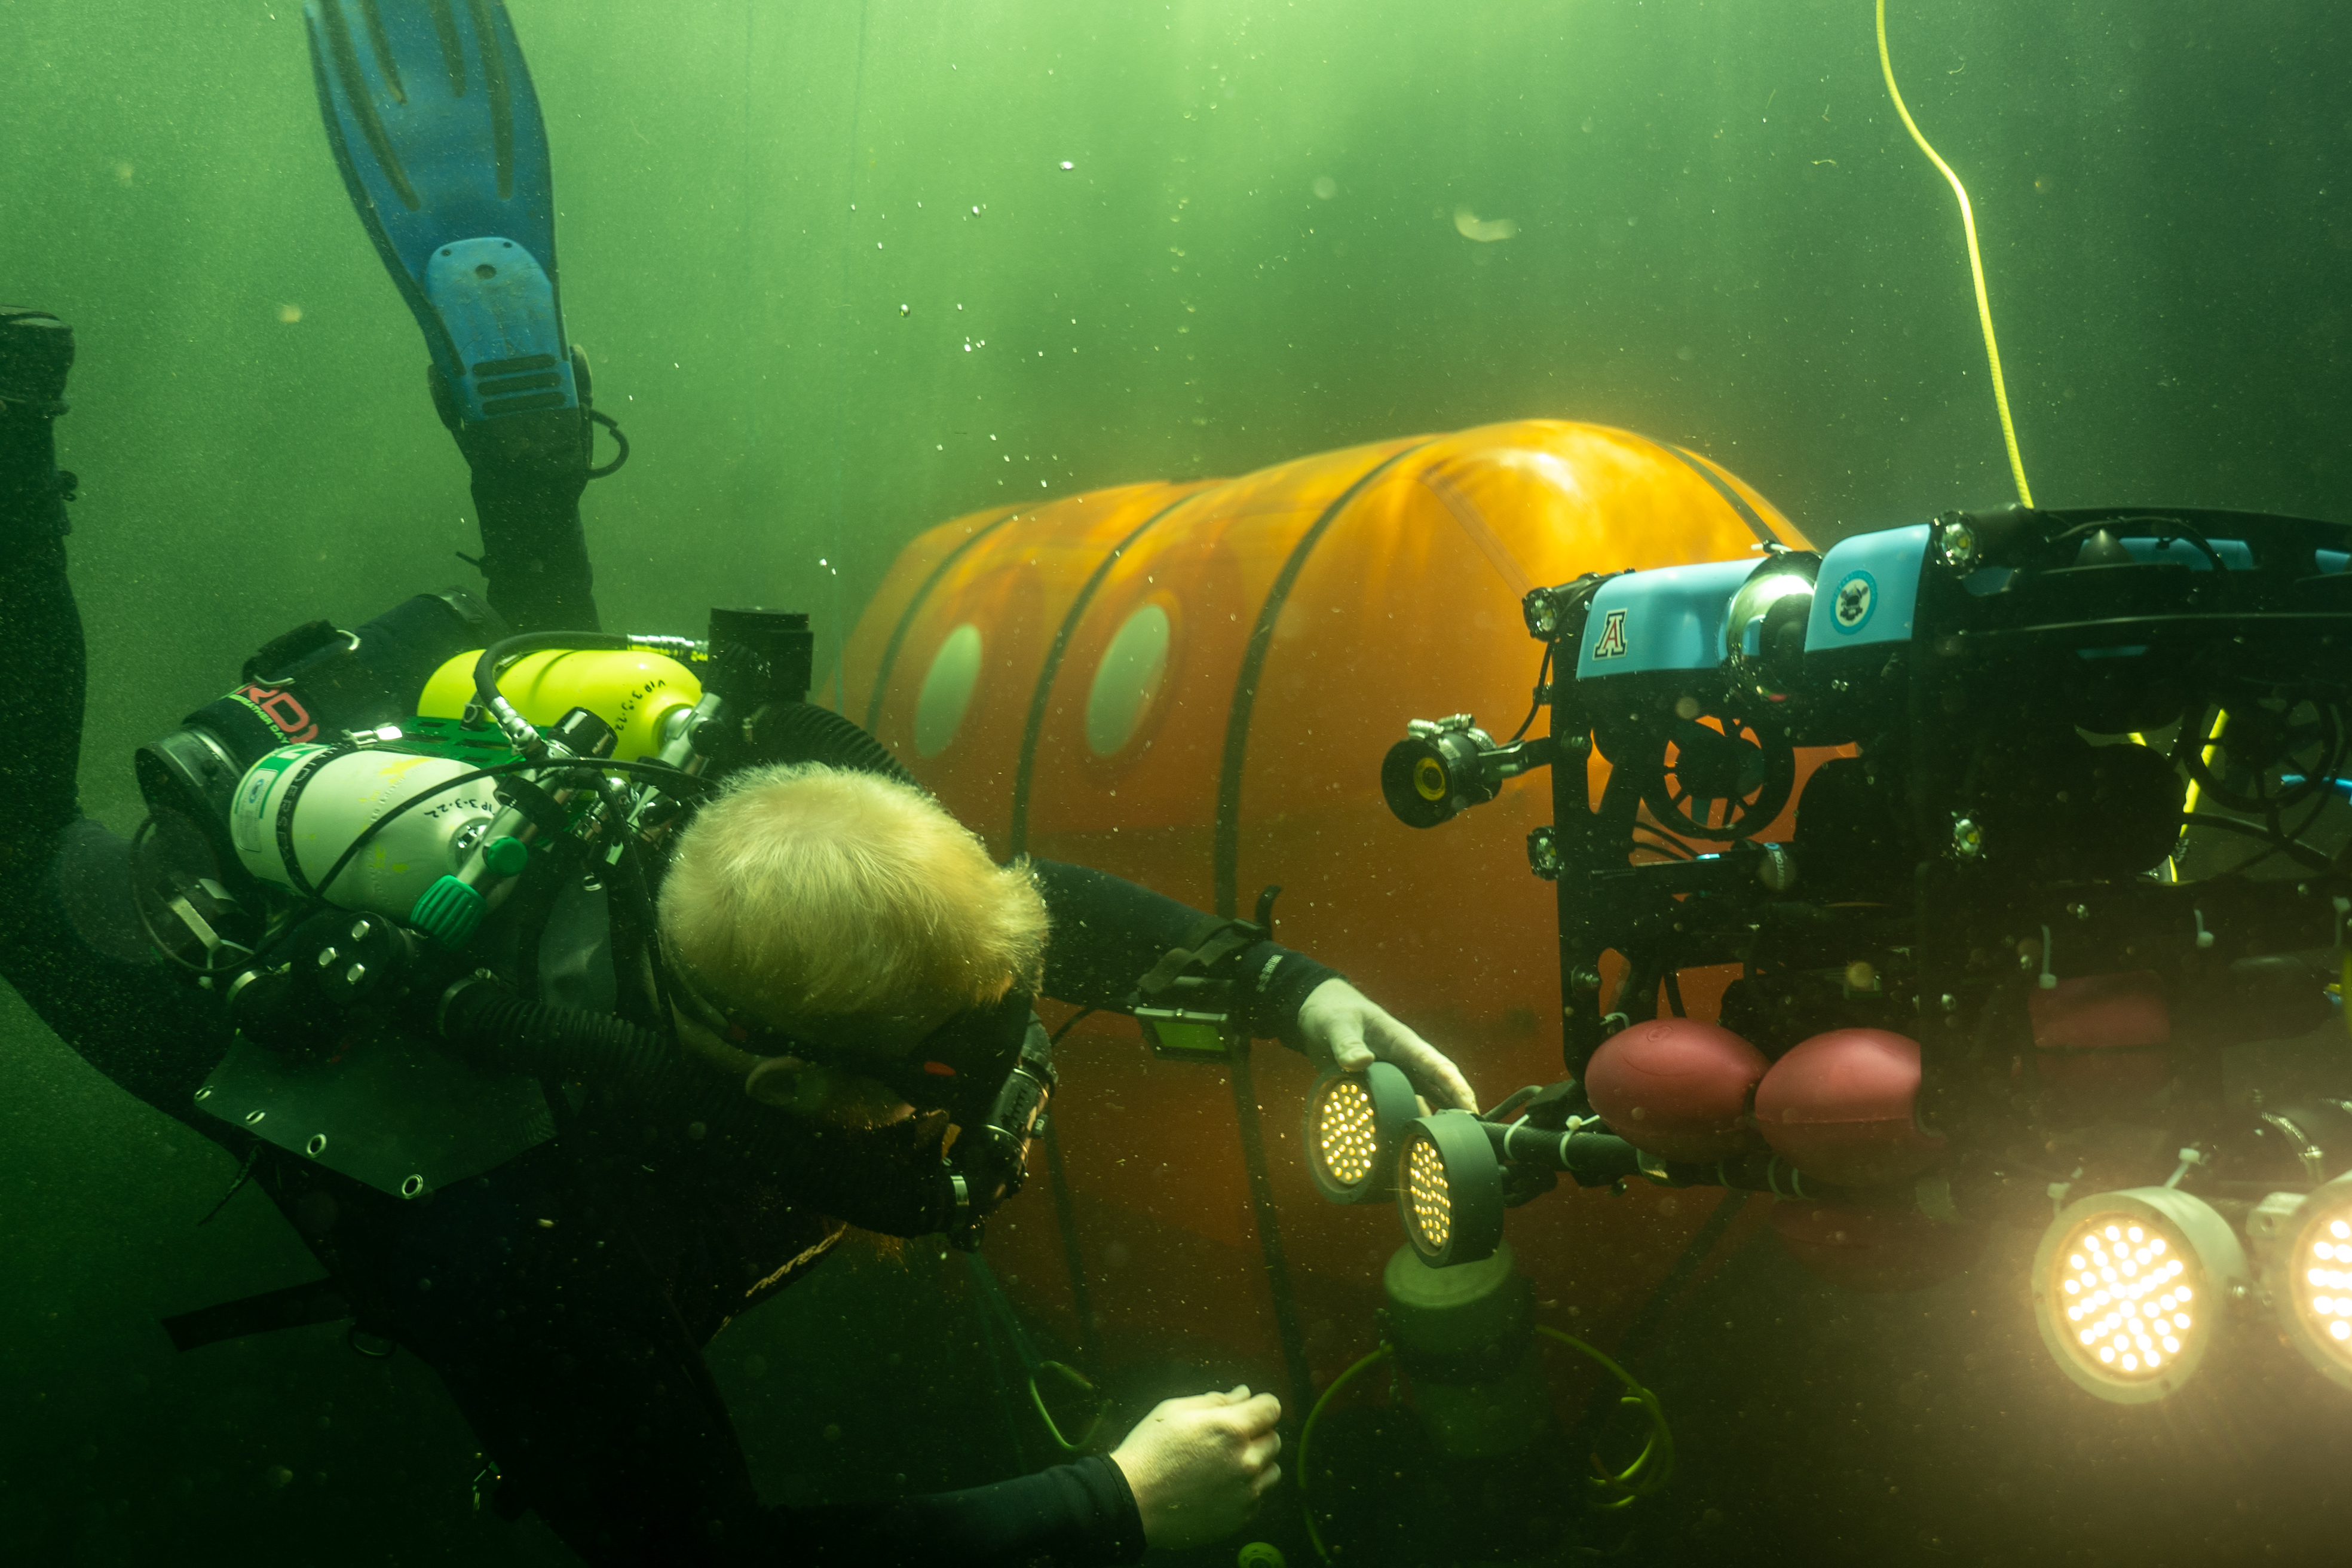 Scientific Diver interacts with robotic vehicle outside of Ocean Space Habitat background